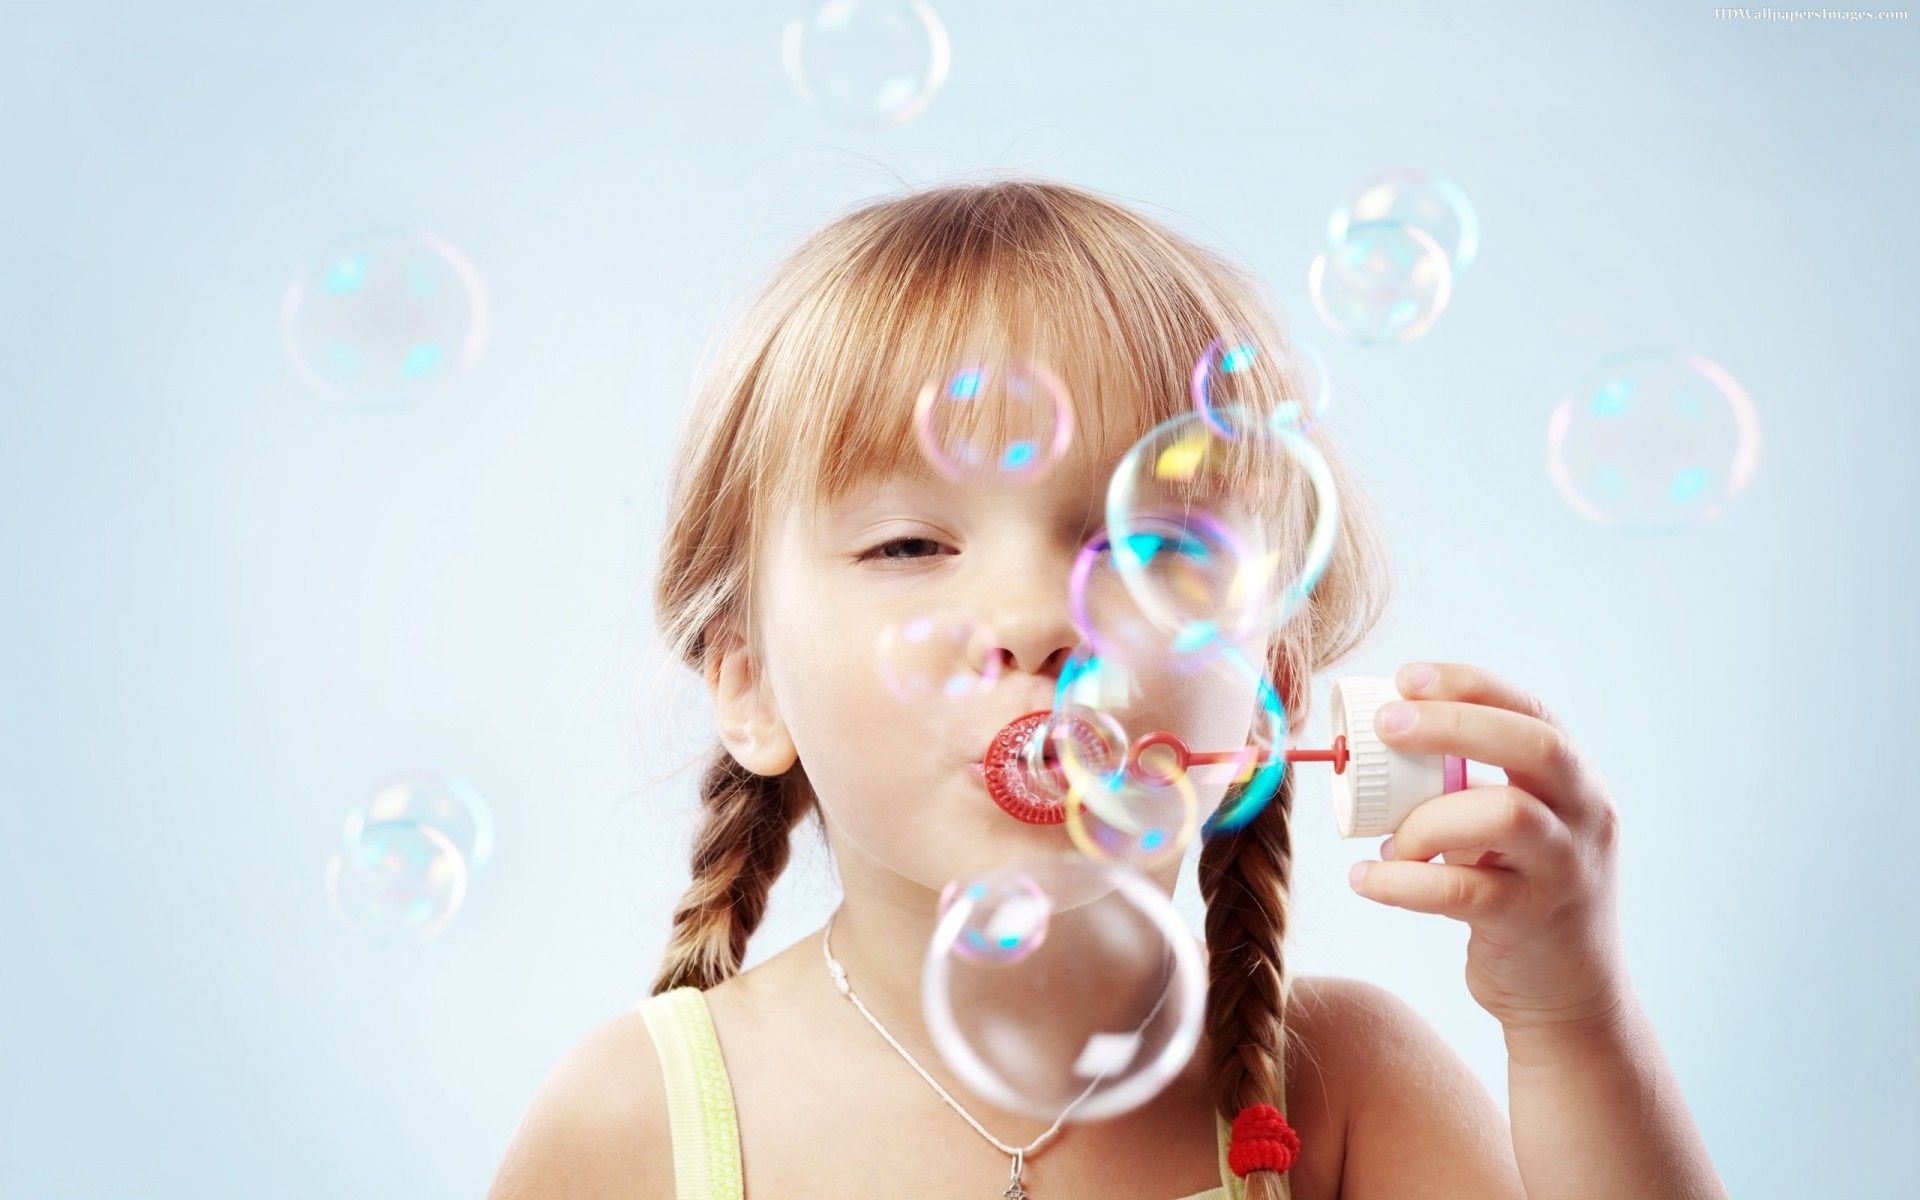 Blowing Bubbles: can be used as am intervention that addresses self ...